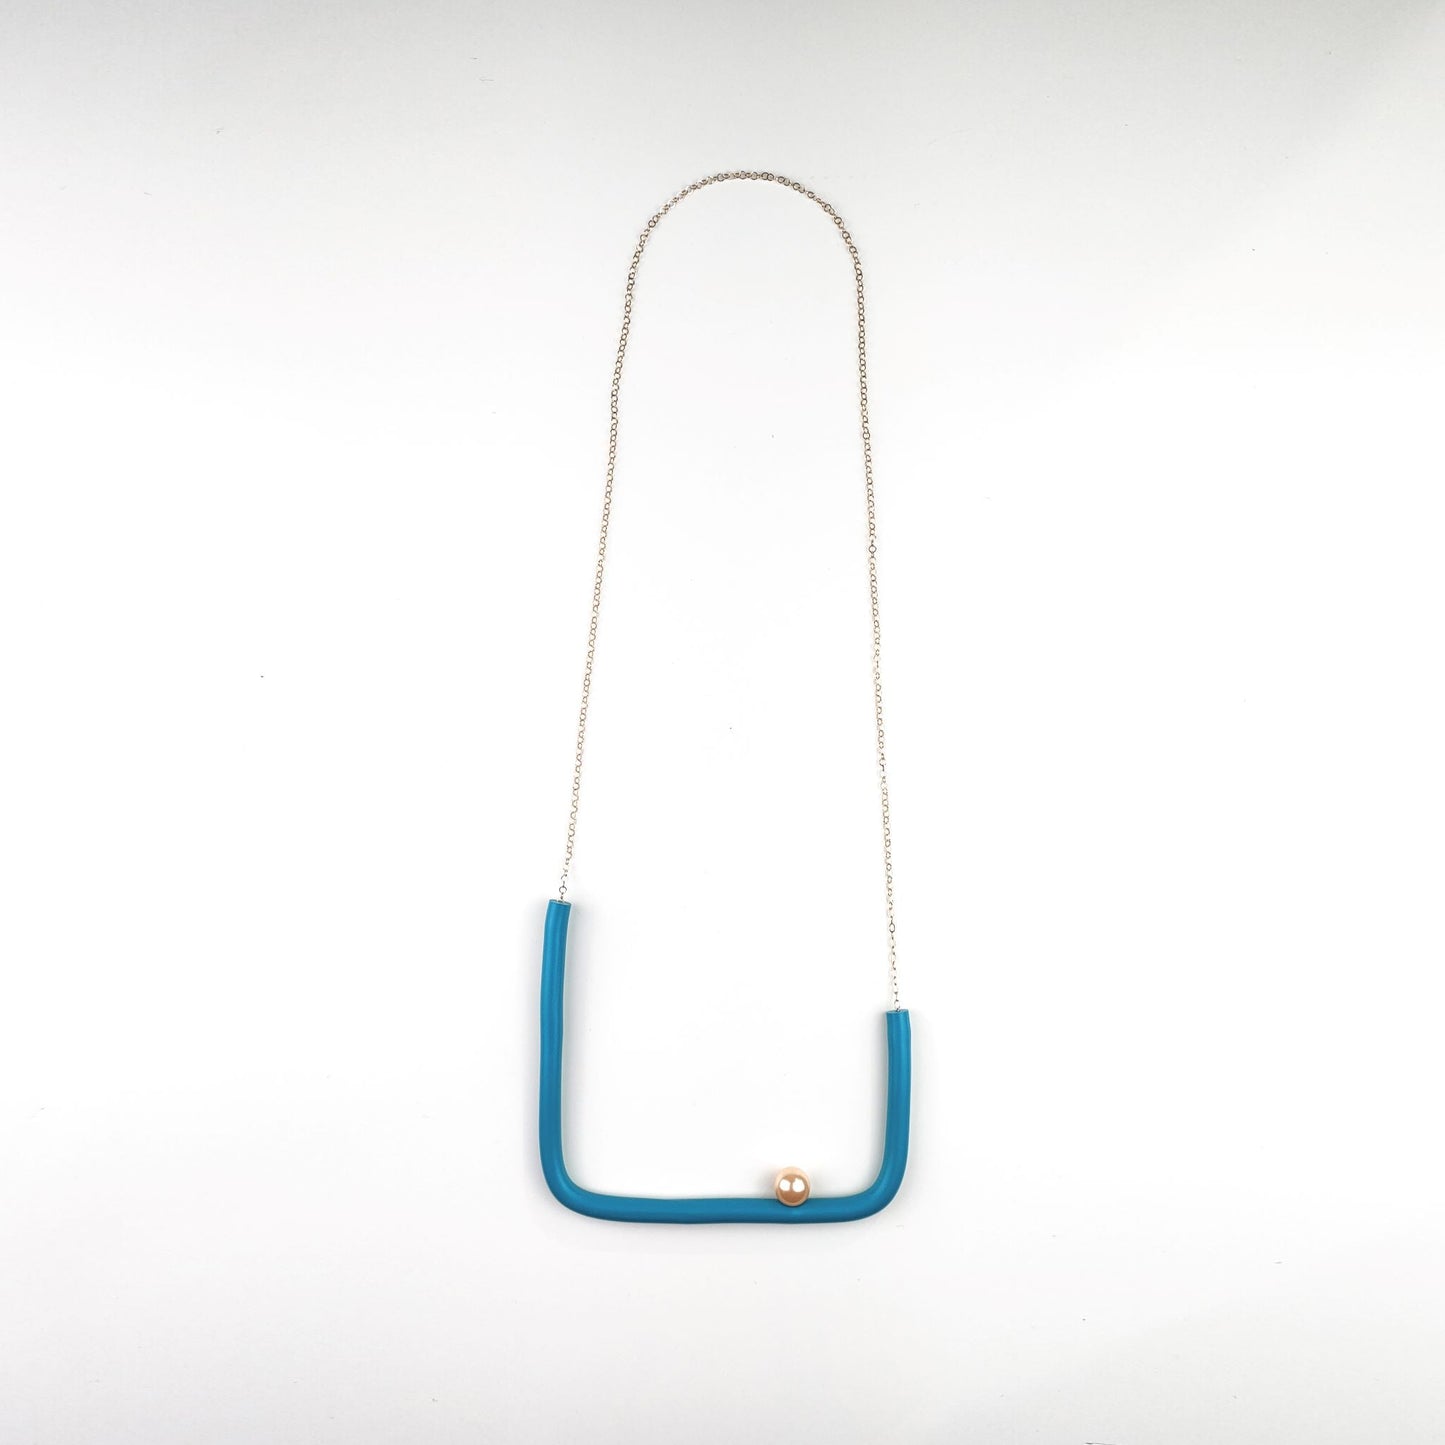 BILICO square necklace - teal color / light brown pearl